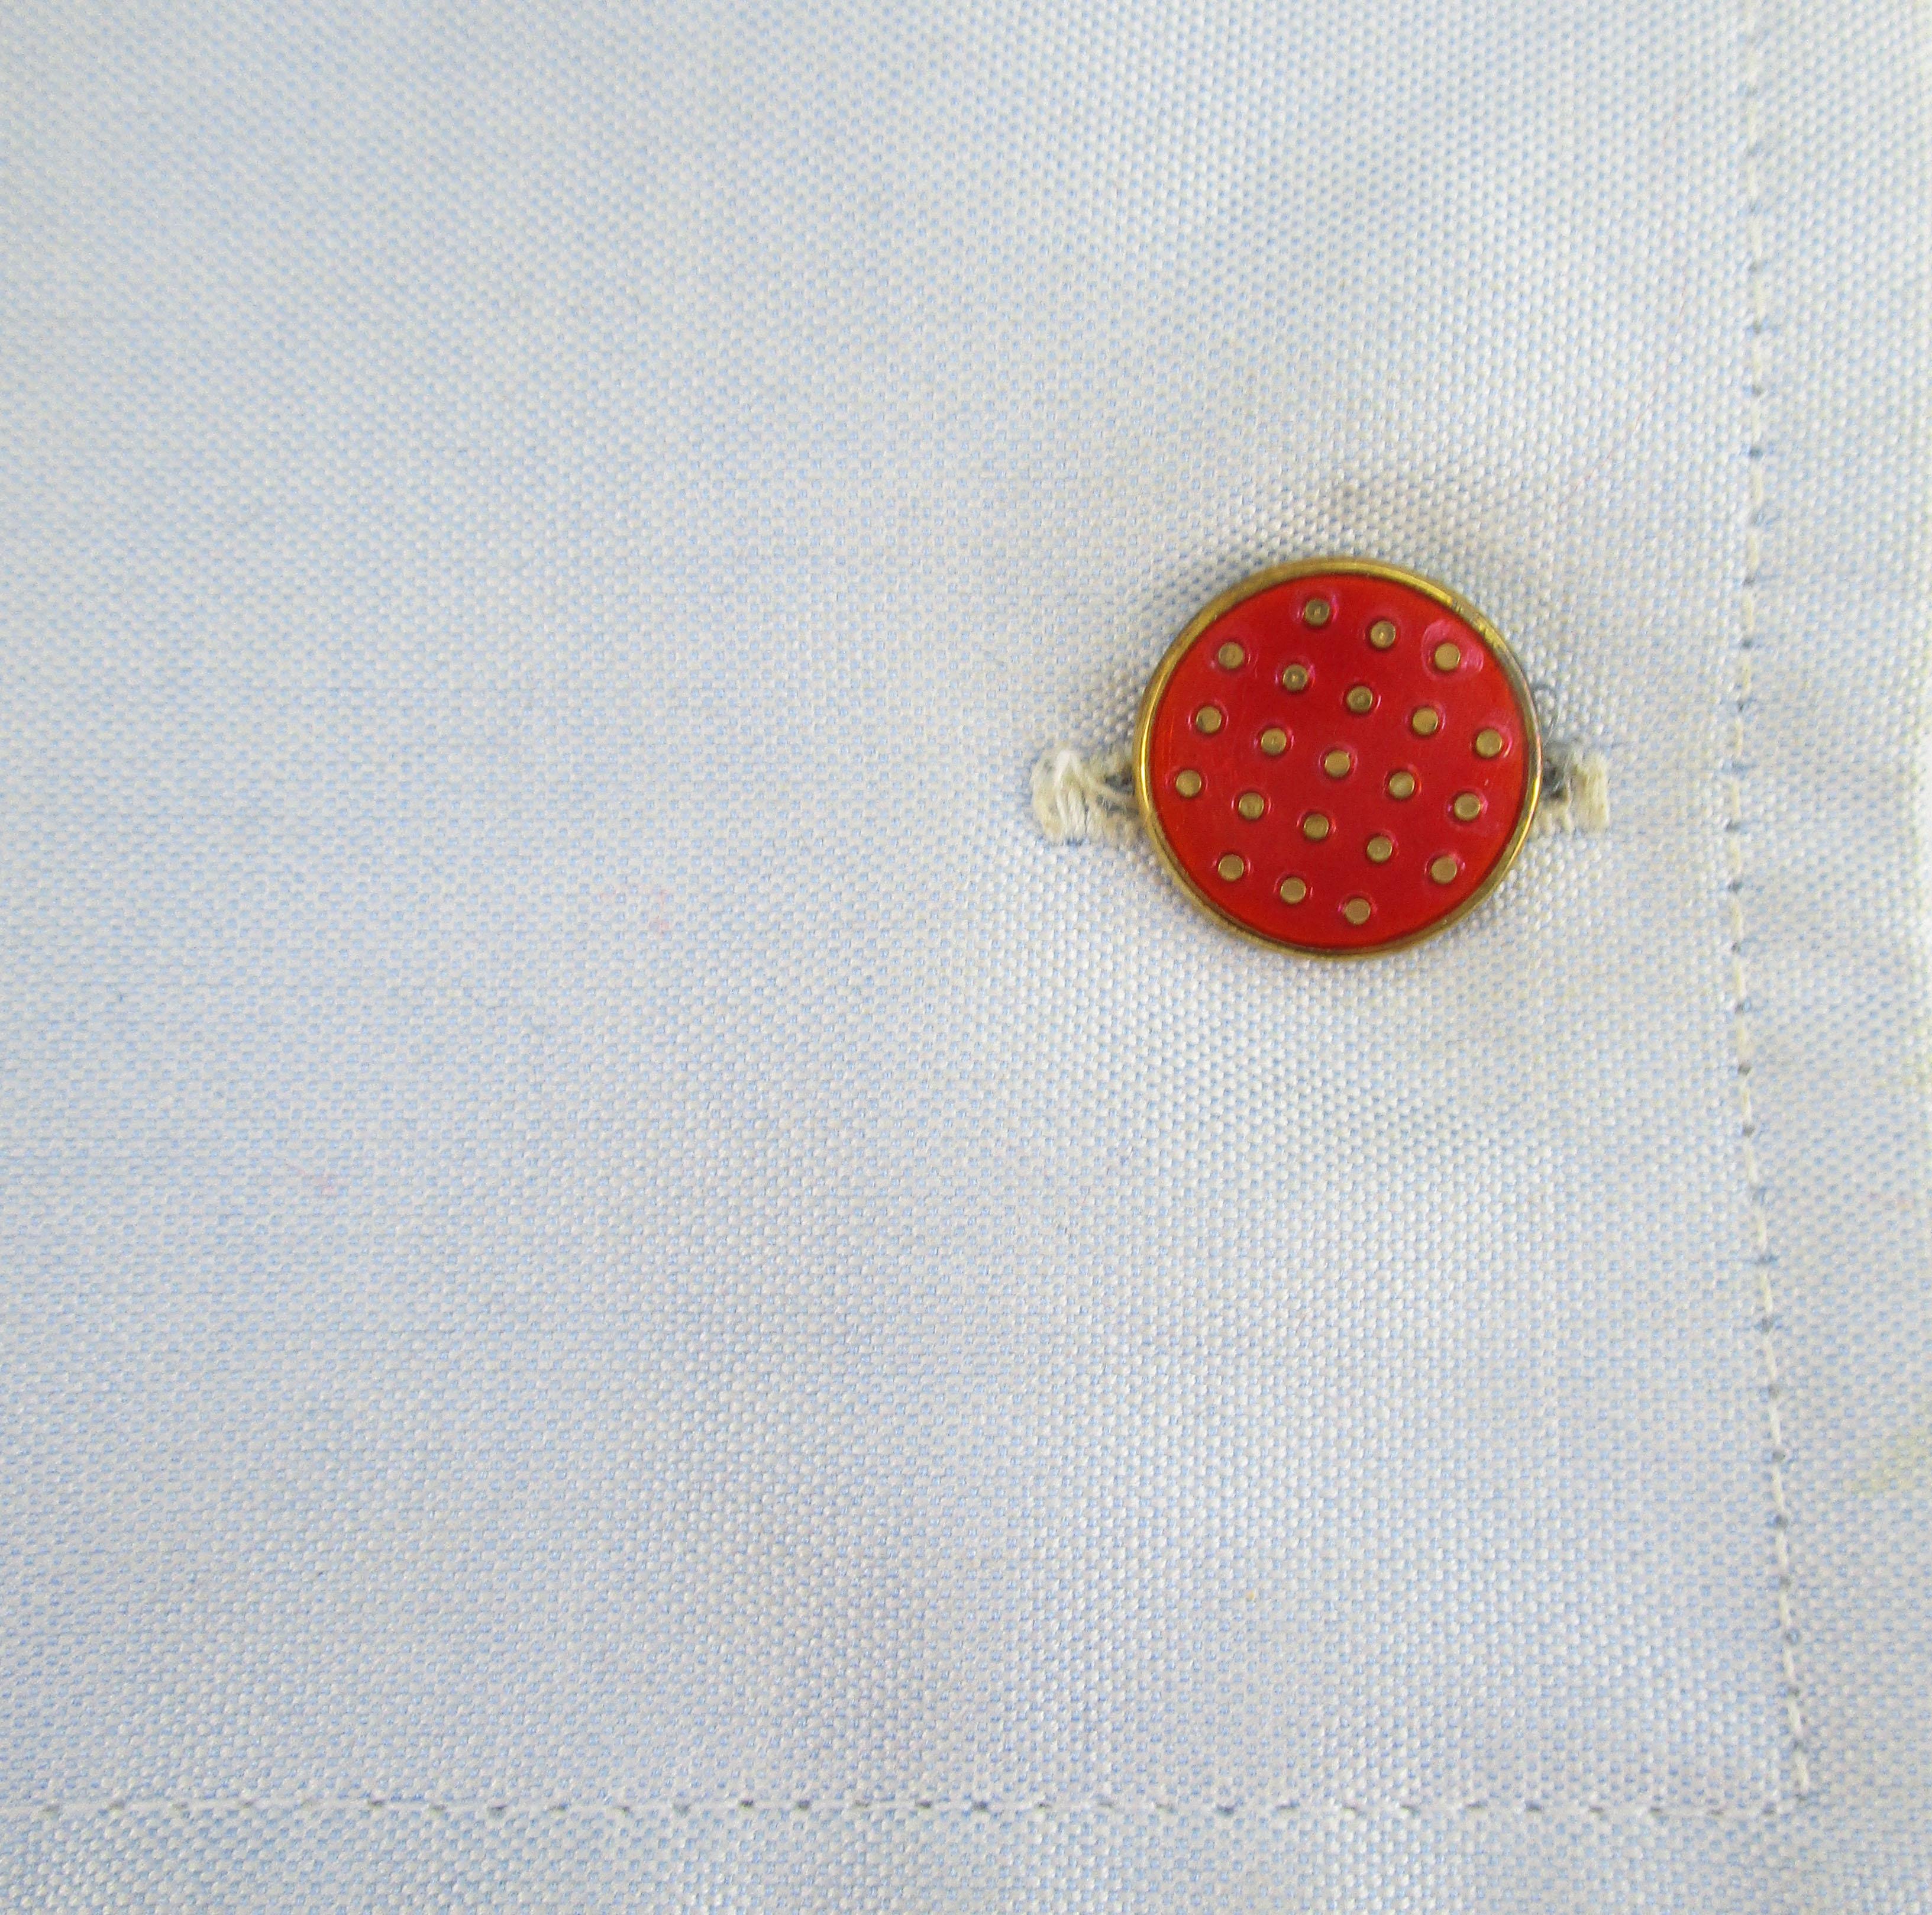 Vermeille Red Enamel Polka Dot Cufflinks In New Condition For Sale In Lexington, KY